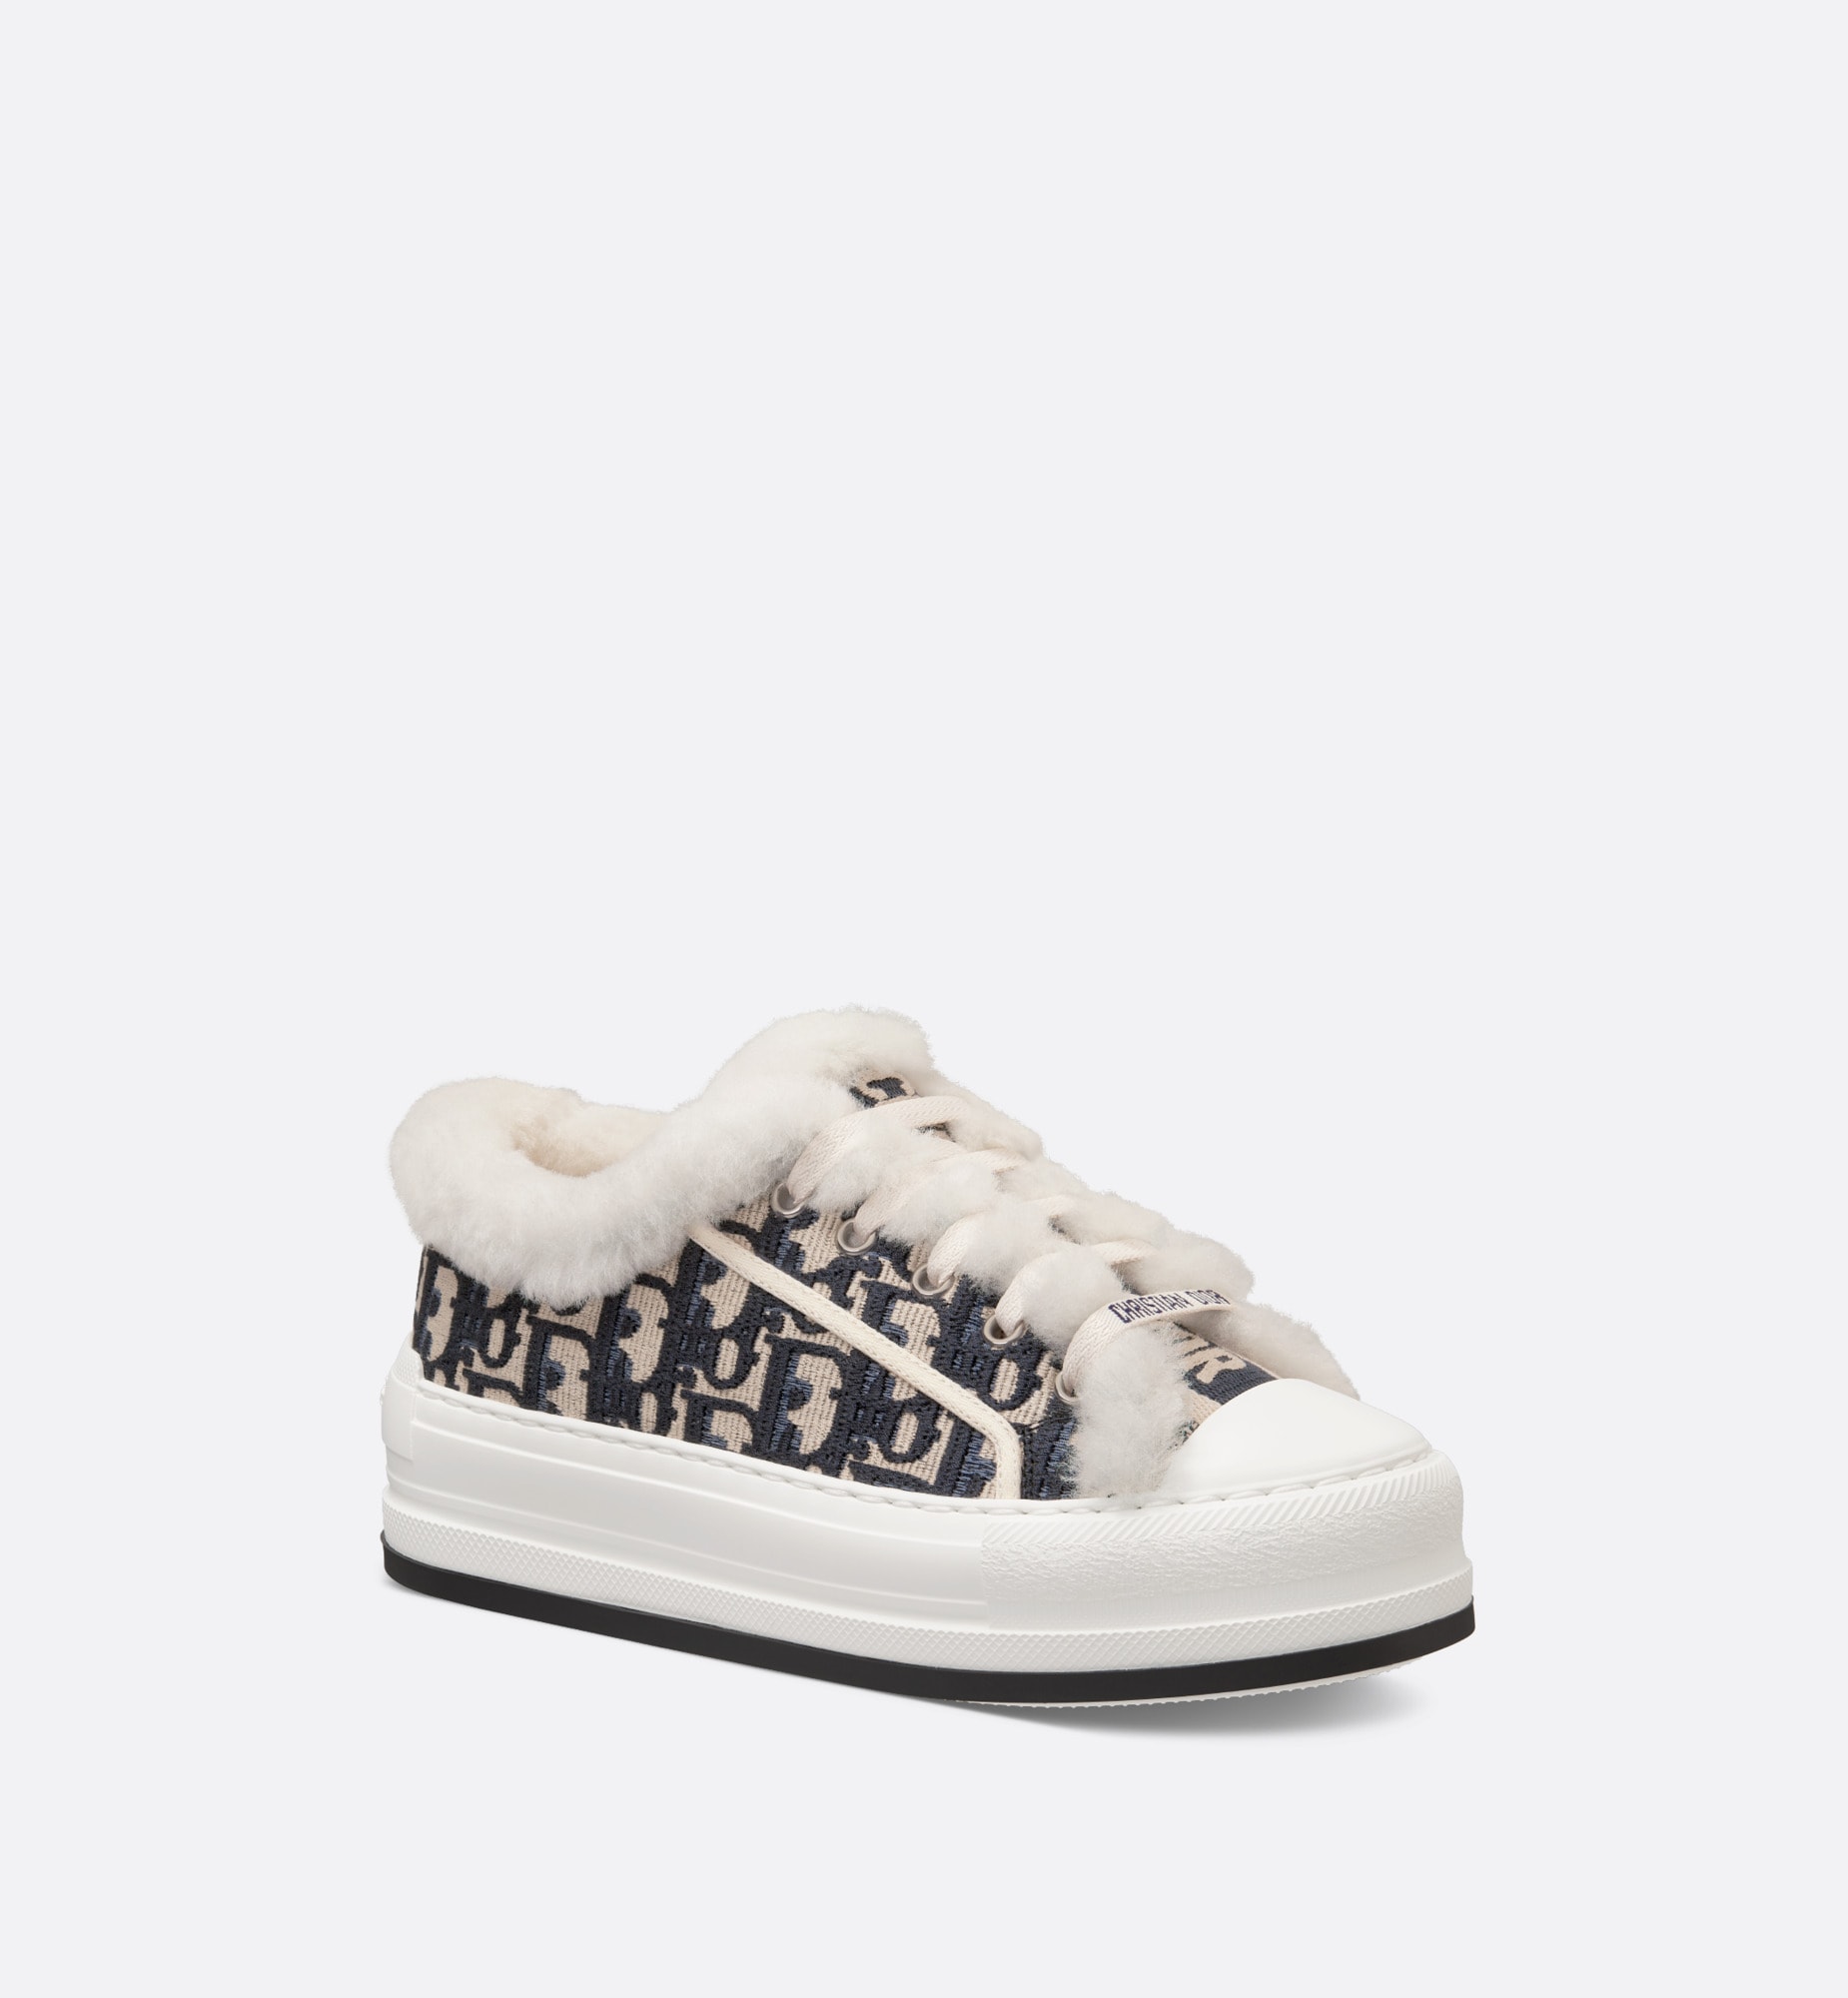 Walk'n' dior platform sneaker deep blue dior oblique embroidered cotton and white shearling